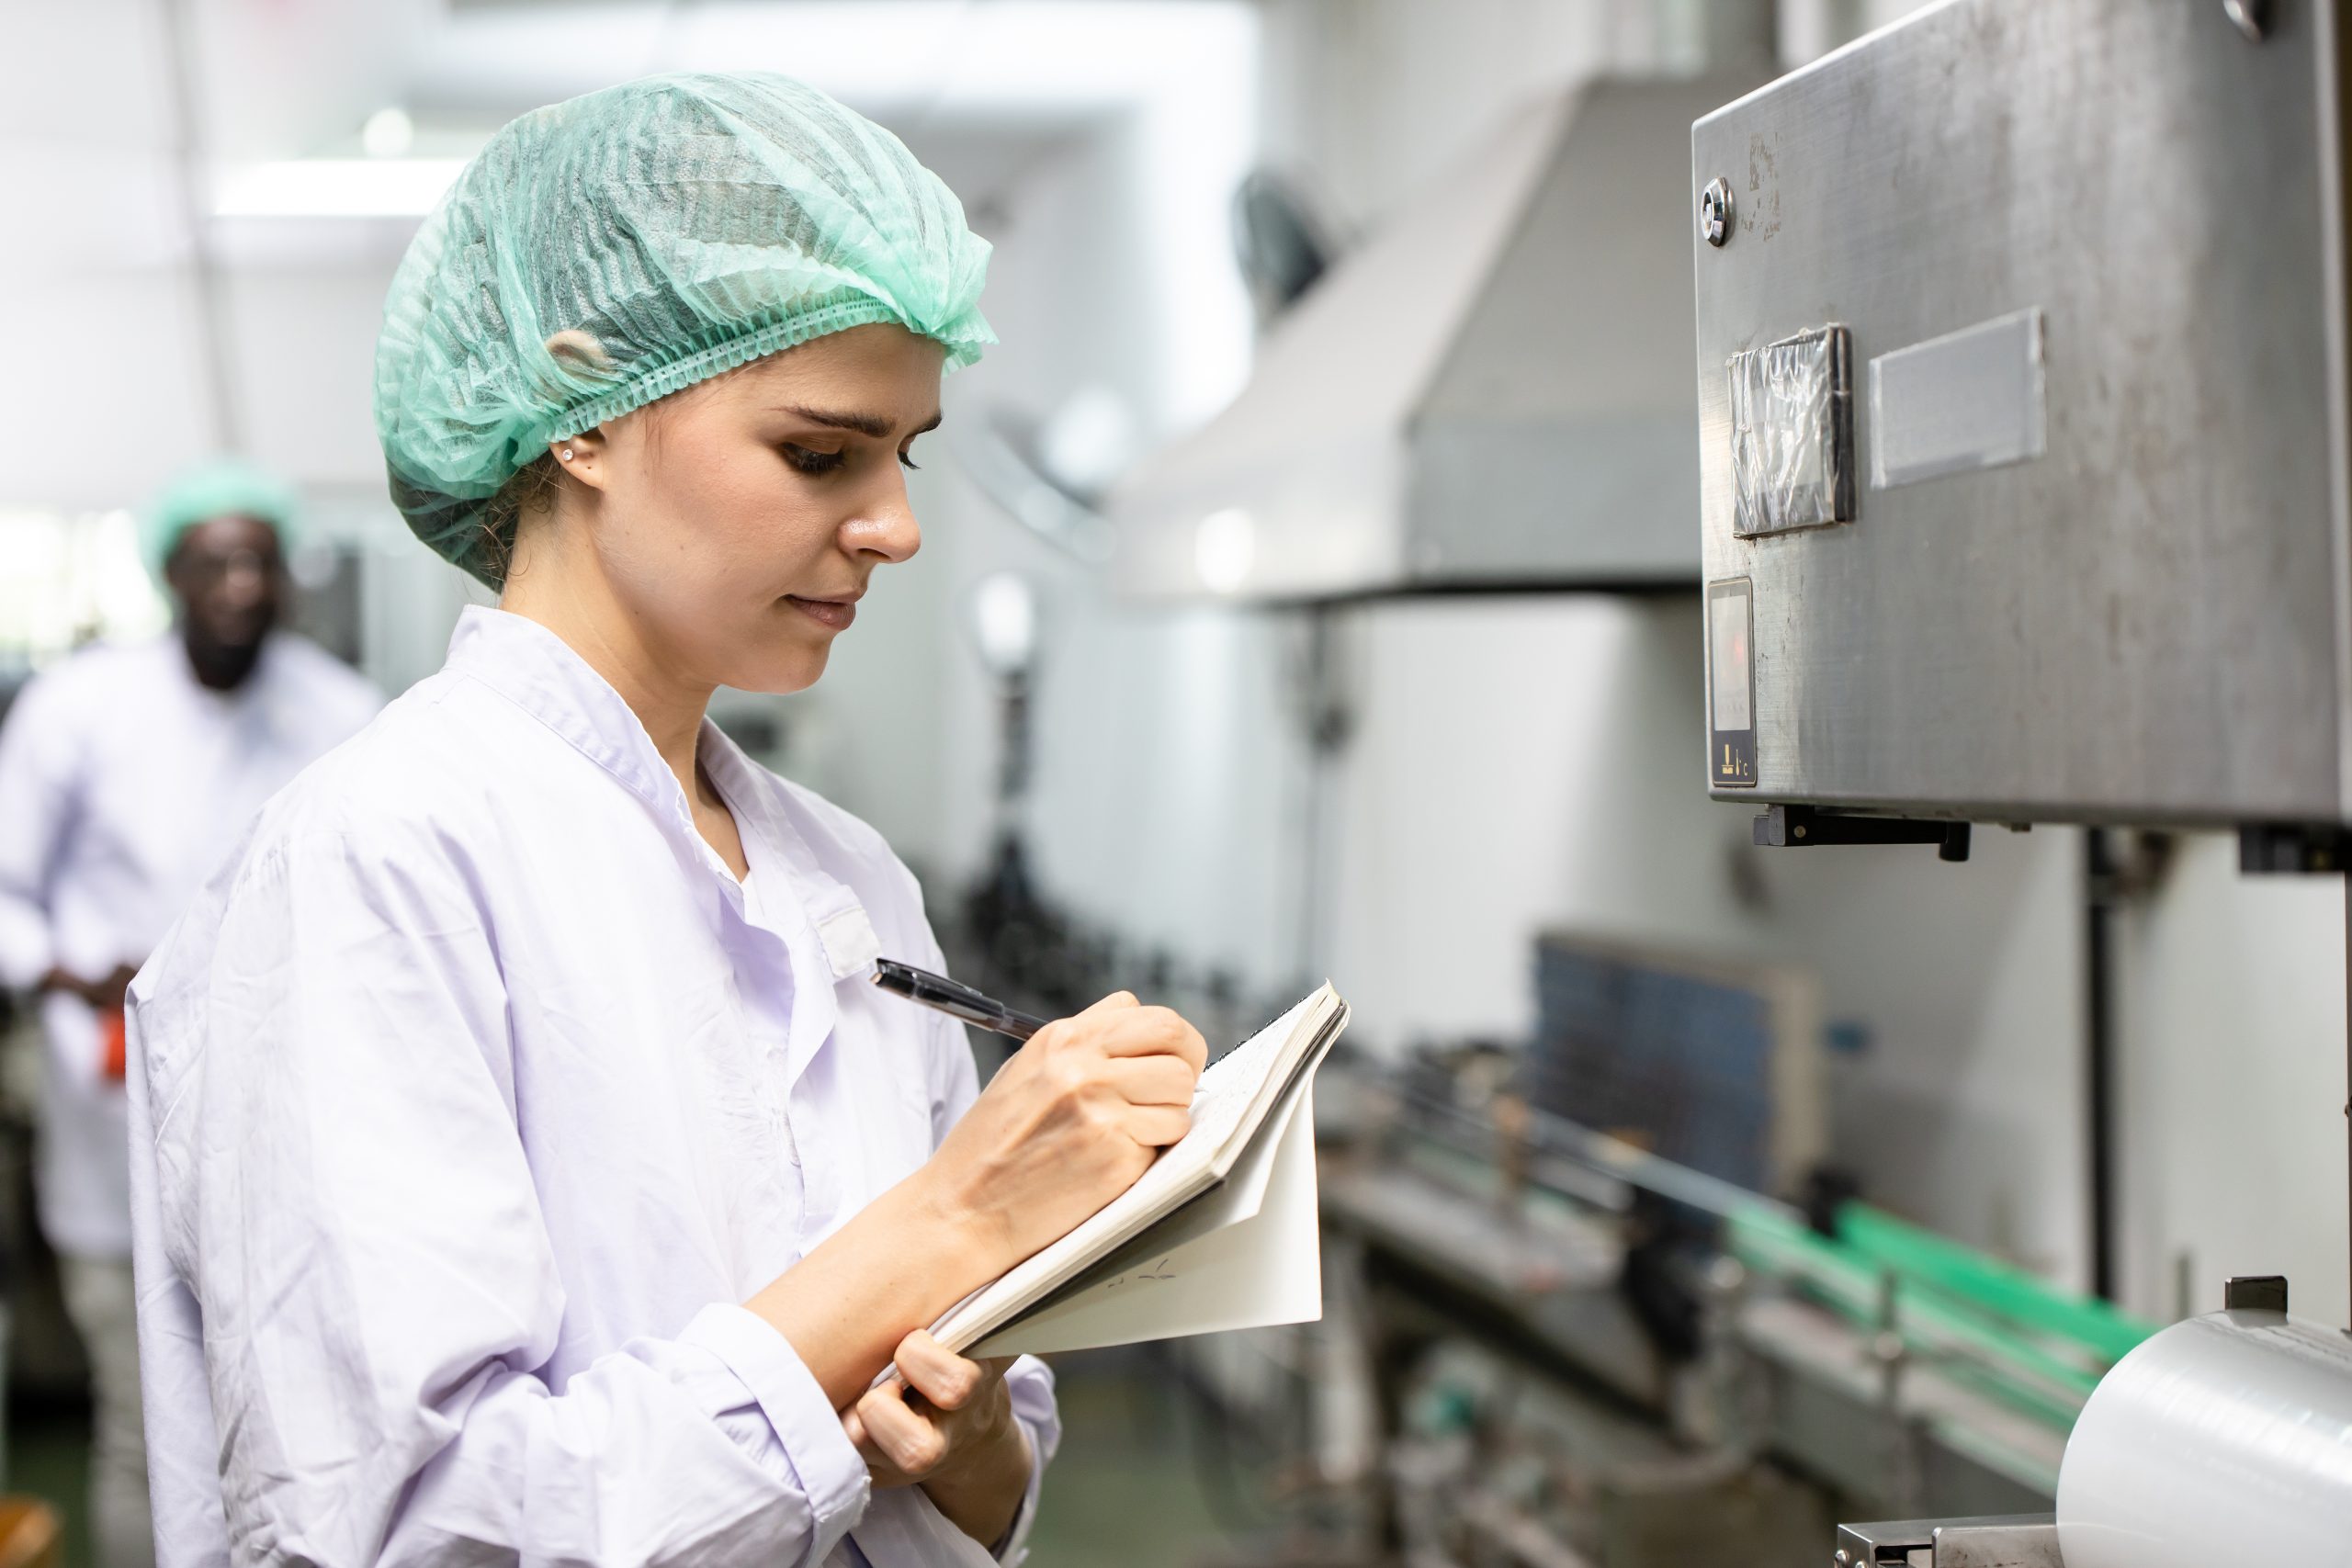 About Food Safety in the Food Processing Industry